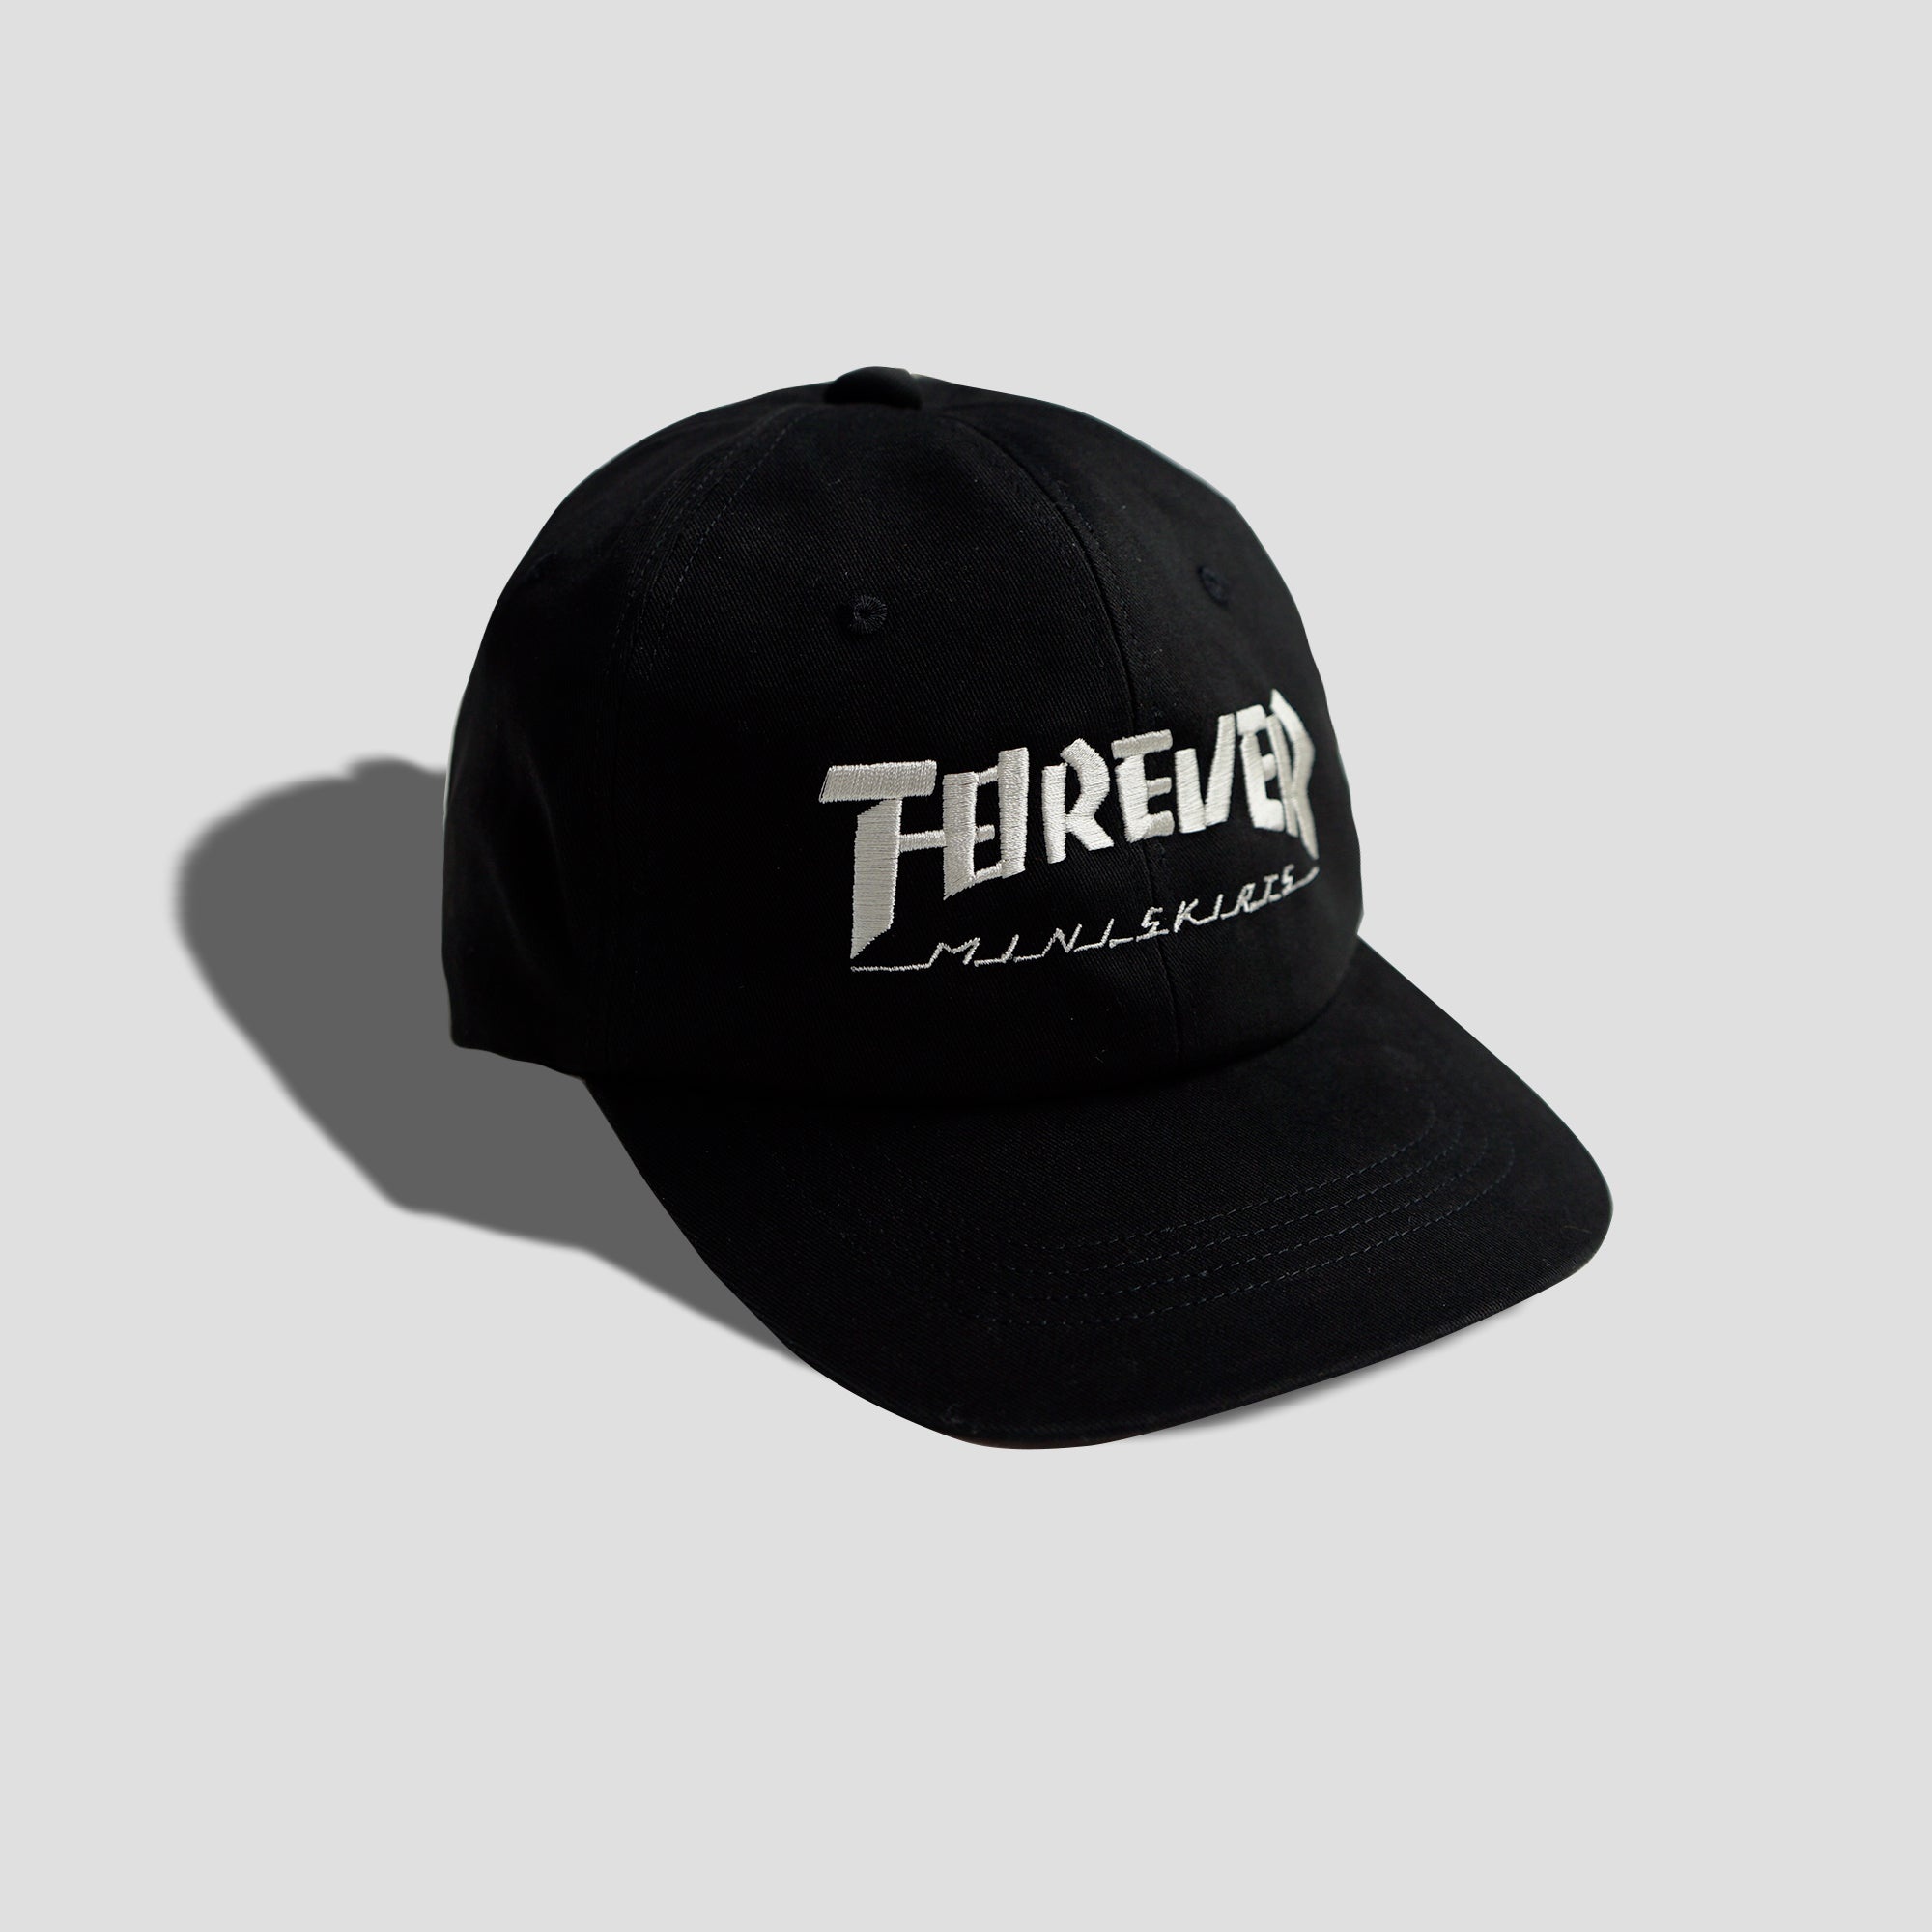 BRUSHED TWILL 6PANNEL SNAP BACK CAPS - 1